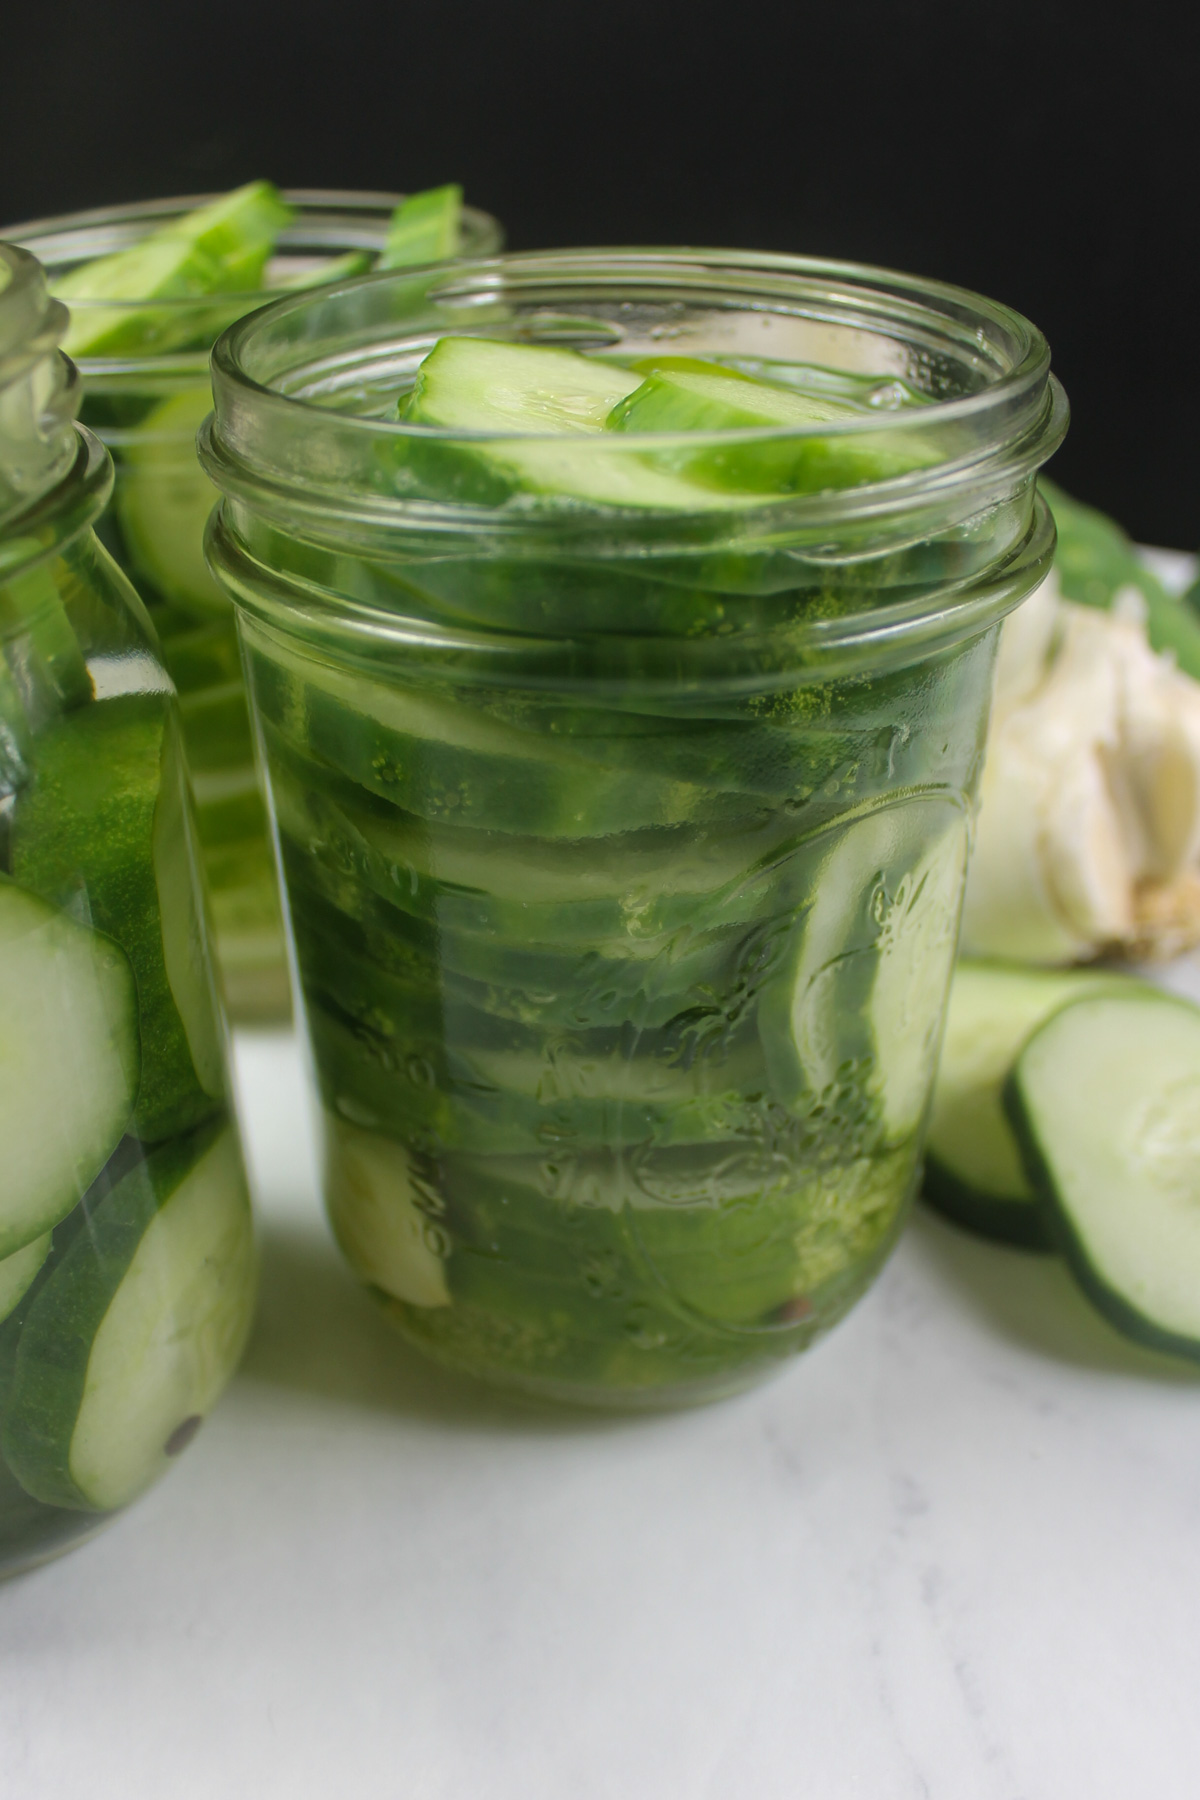 Old fashioned refrigerator pickles with cucumbers and garlic.